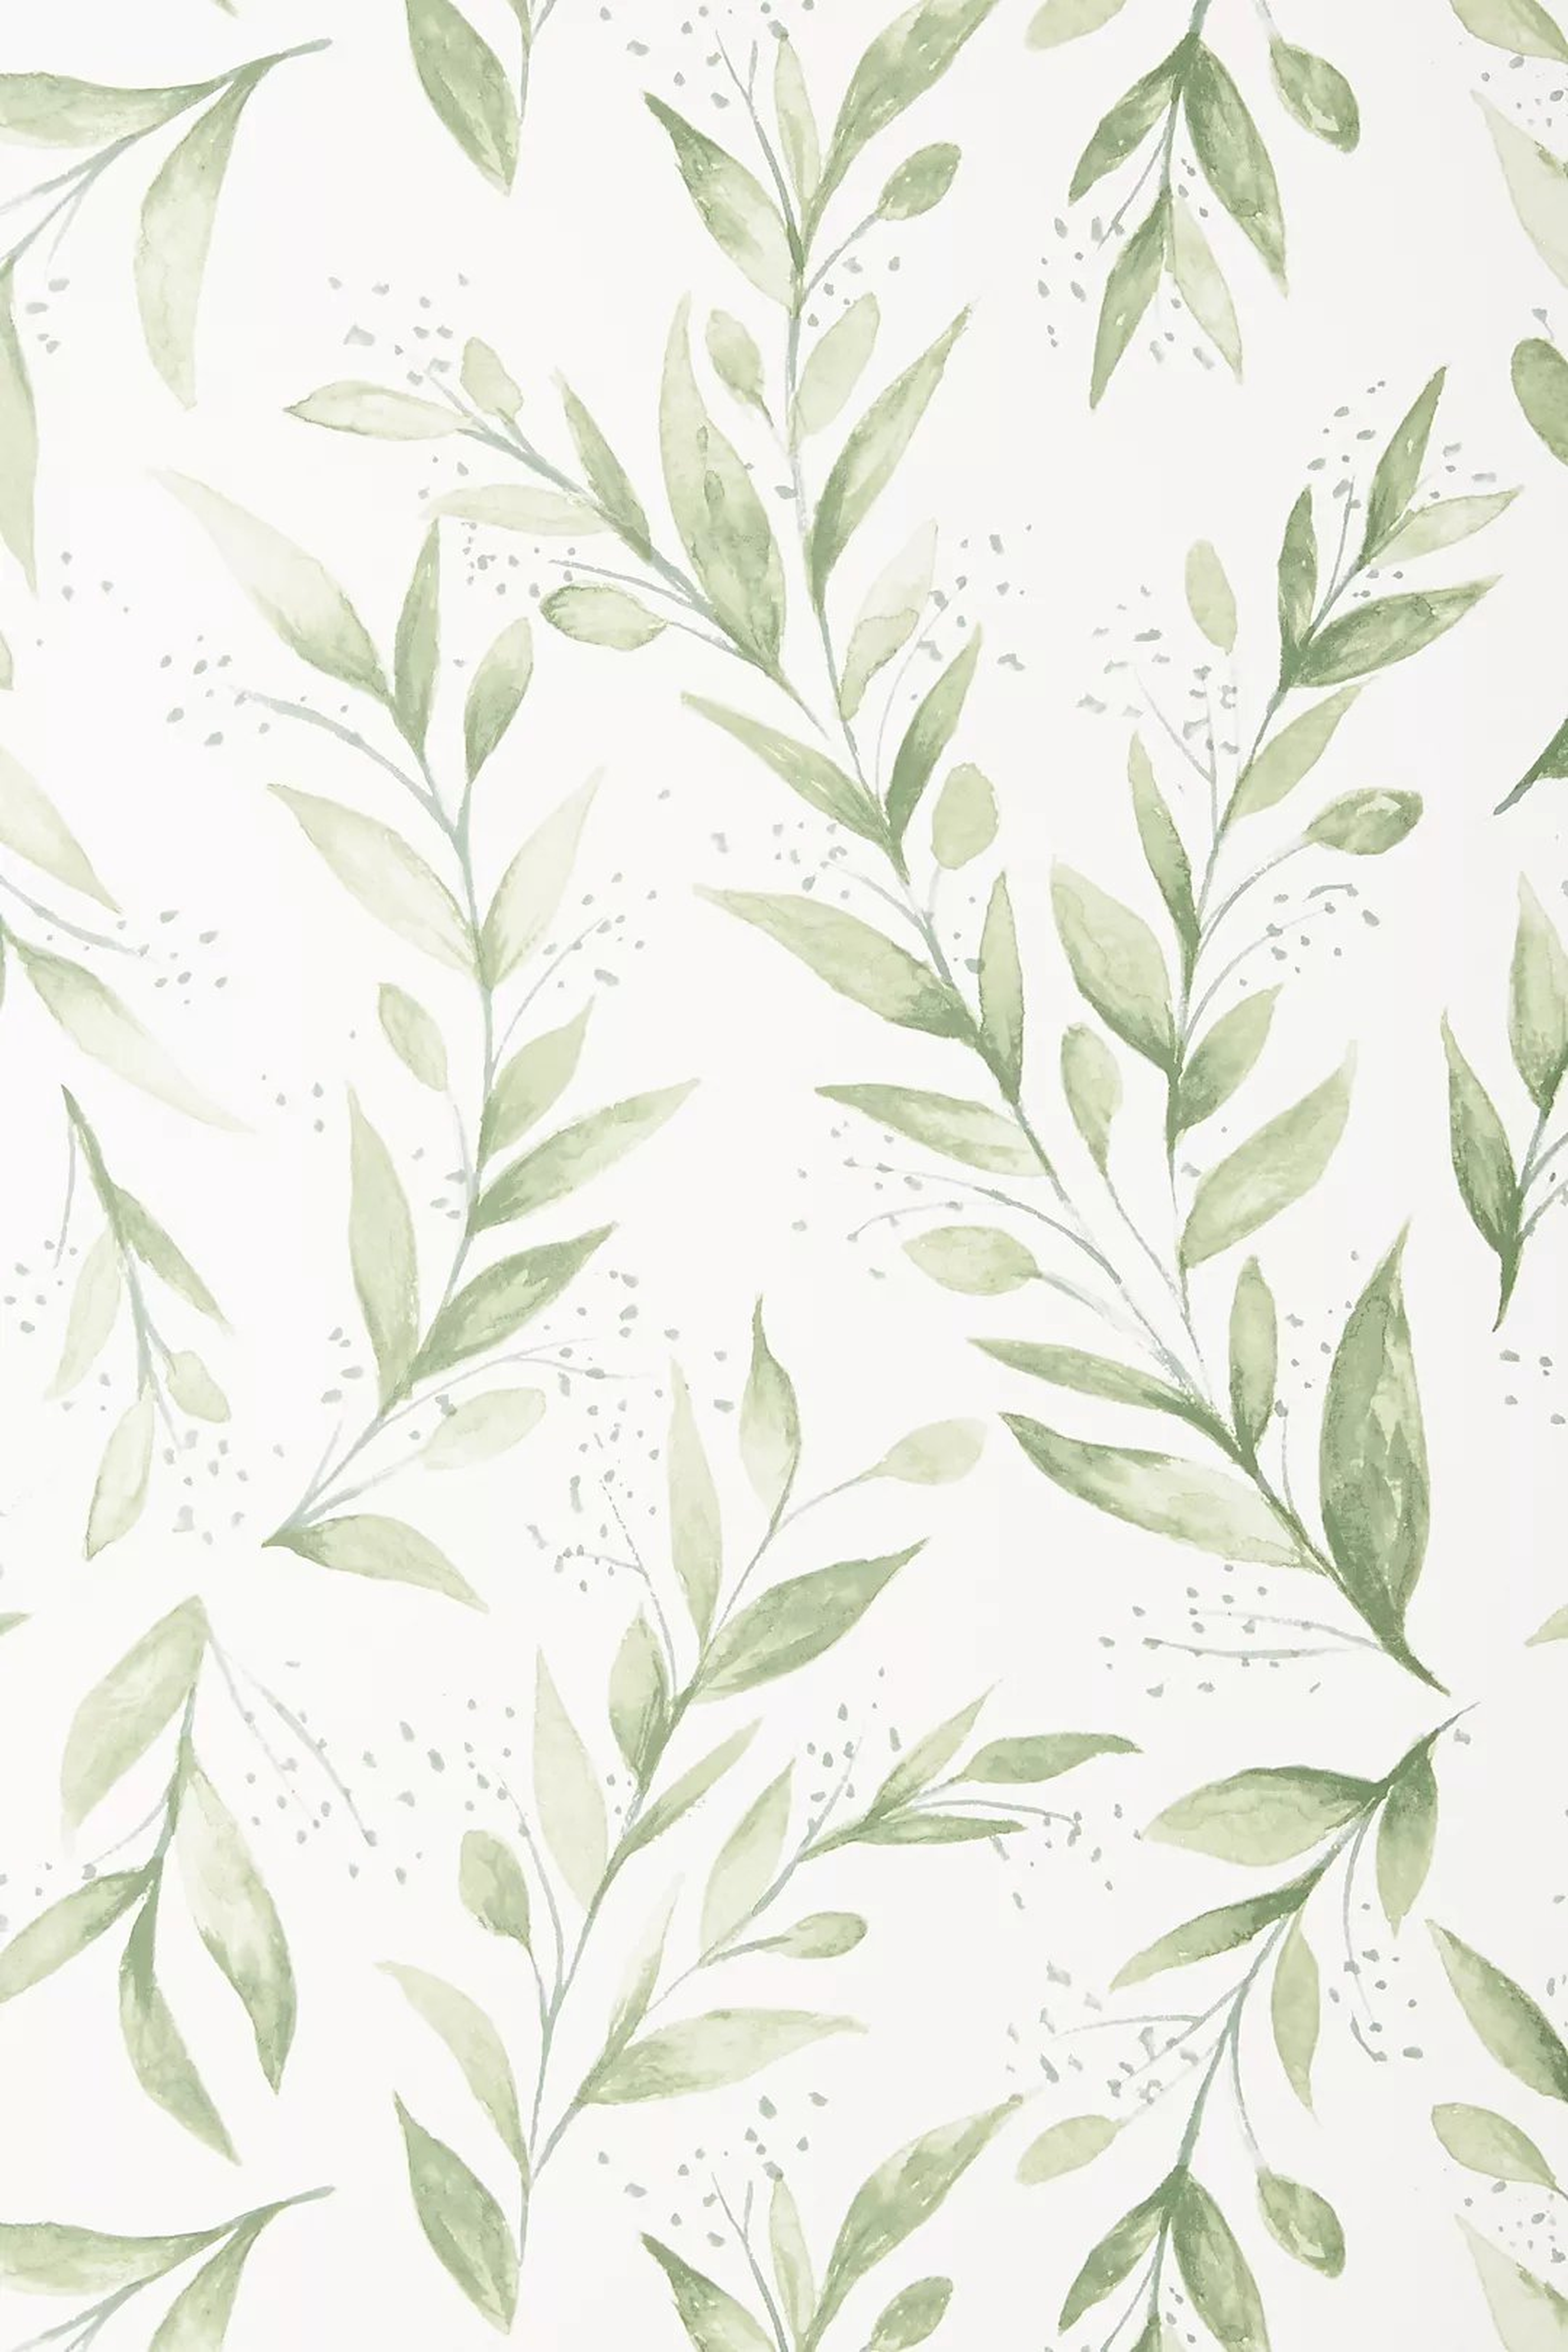 Magnolia Home Olive Branch Wallpaper By Magnolia Home in Black Size SWATCH - Anthropologie